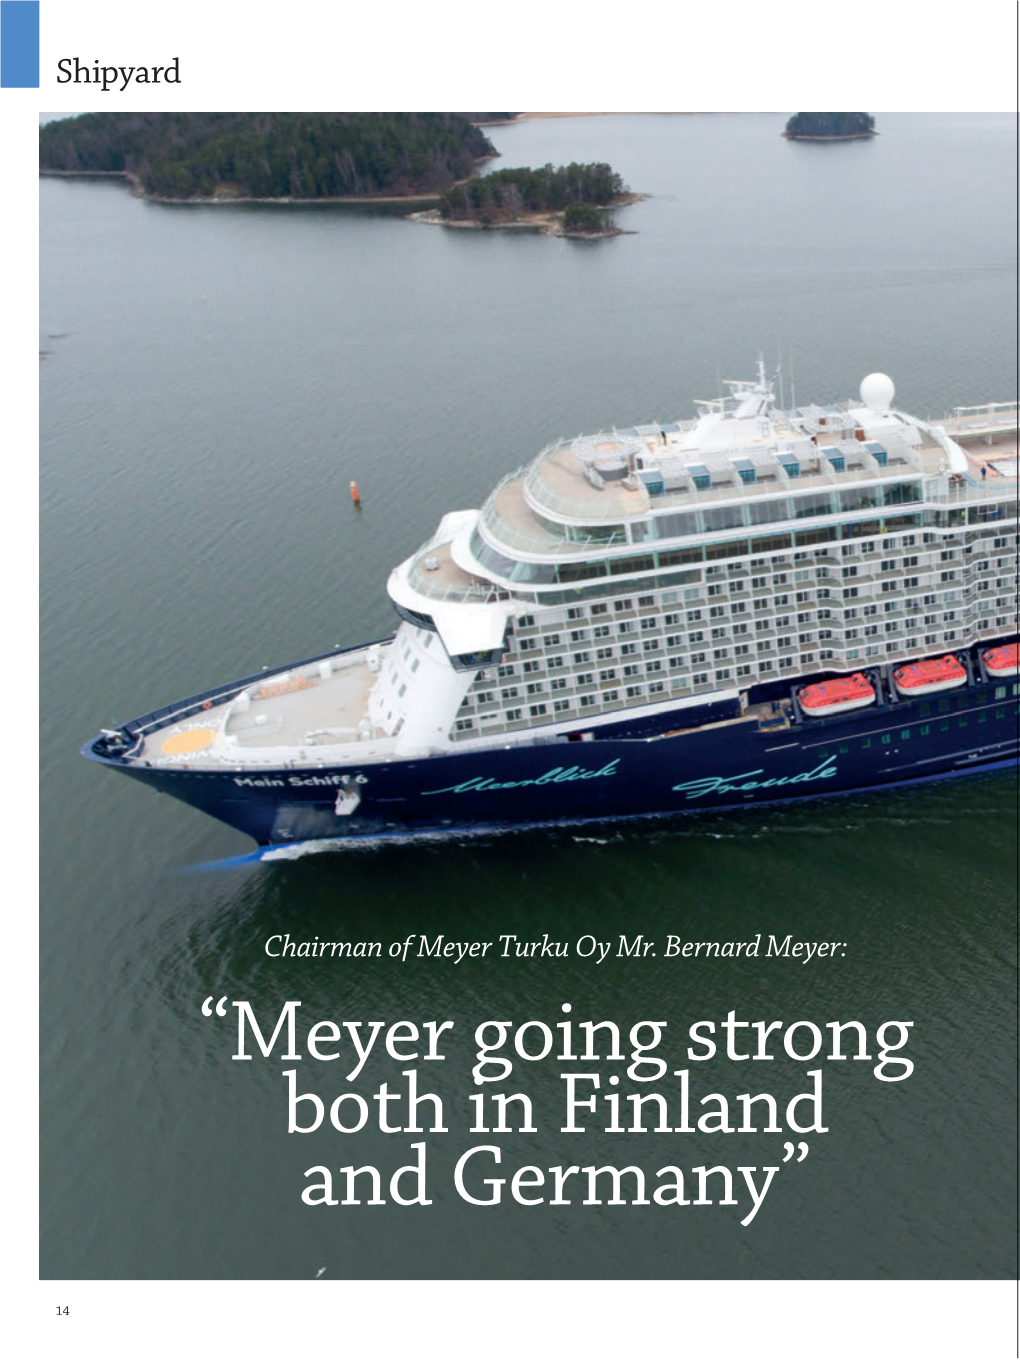 “Meyer Going Strong Both in Finland and Germany”